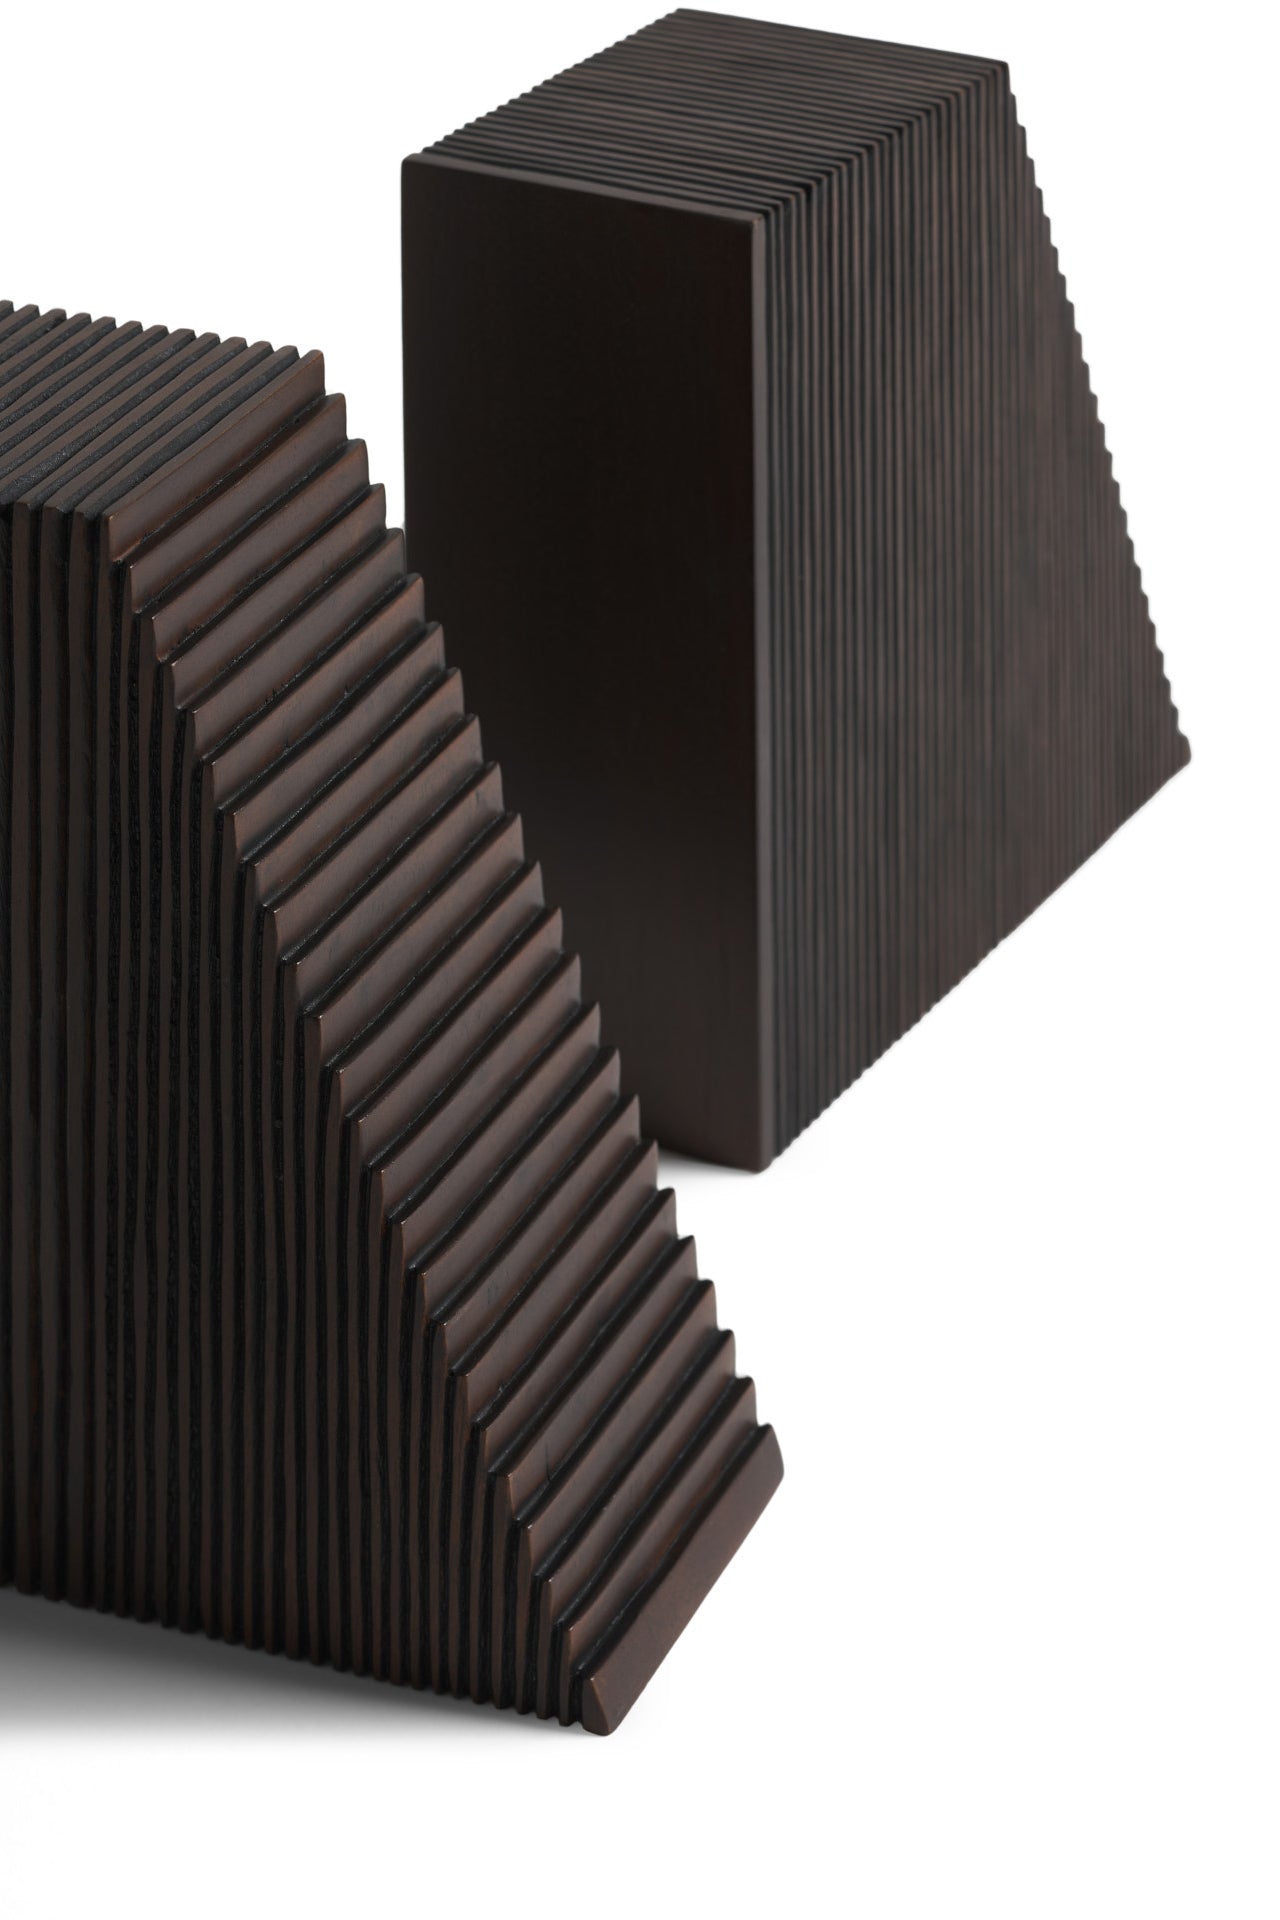 Grooves Dark Brown Mahogany Bookends, Set Of 2